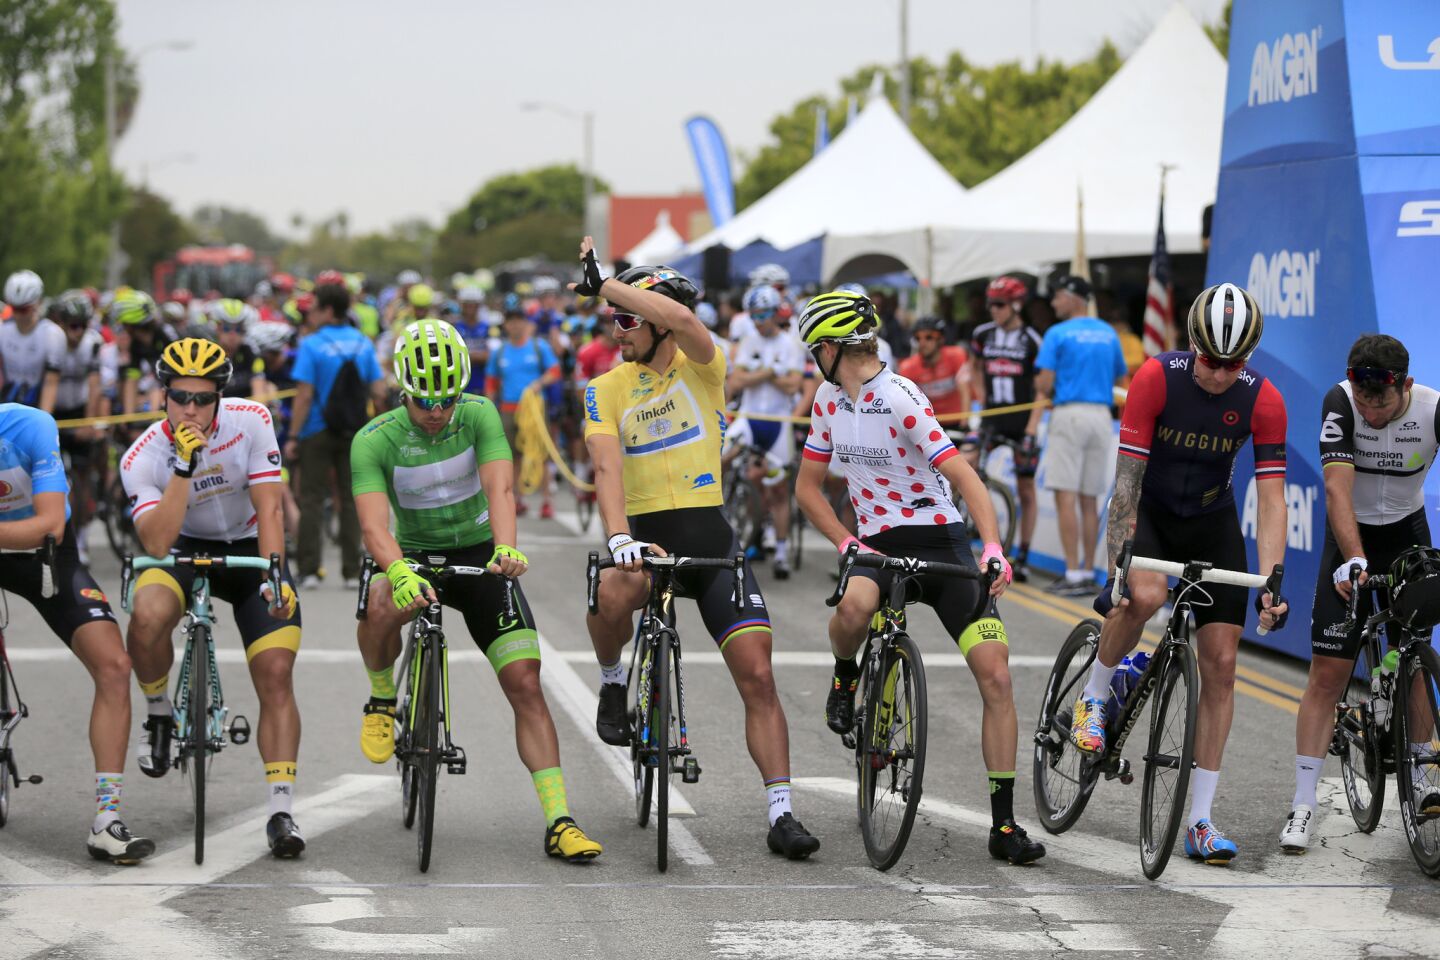 Reigning race champion Peter Sagan, center in yellow jersey, waves to fans as racers prepare to start the second stage of the Amgen Tour of California in South Pasadena on May 16.